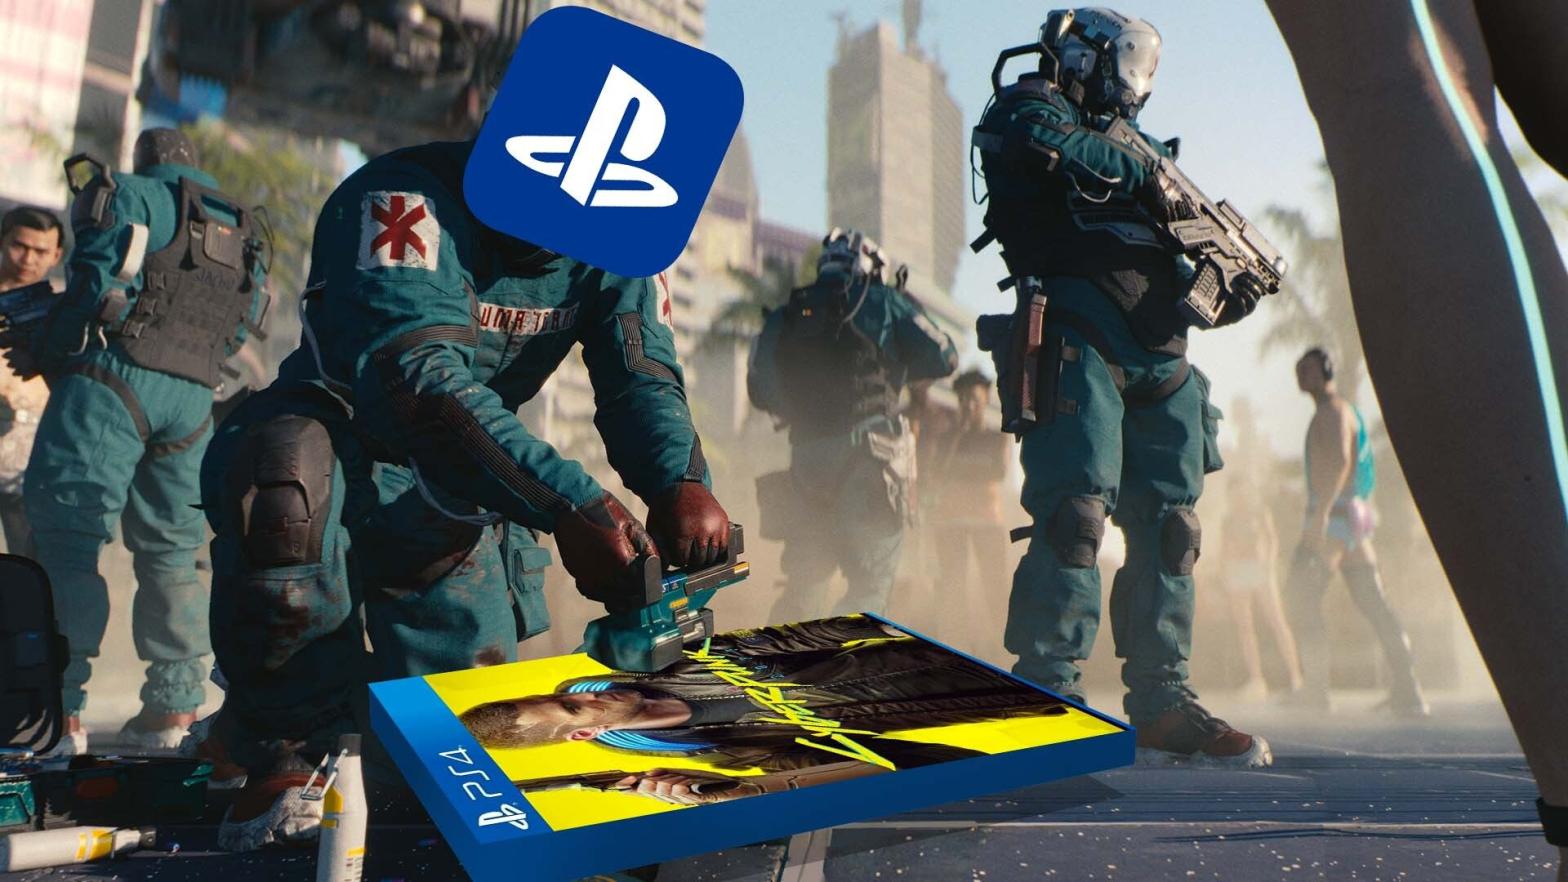 Come on, PS4 Cyberpunk 2077, work with me here. (Image: CD Projekt Red / Sony / Kotaku)